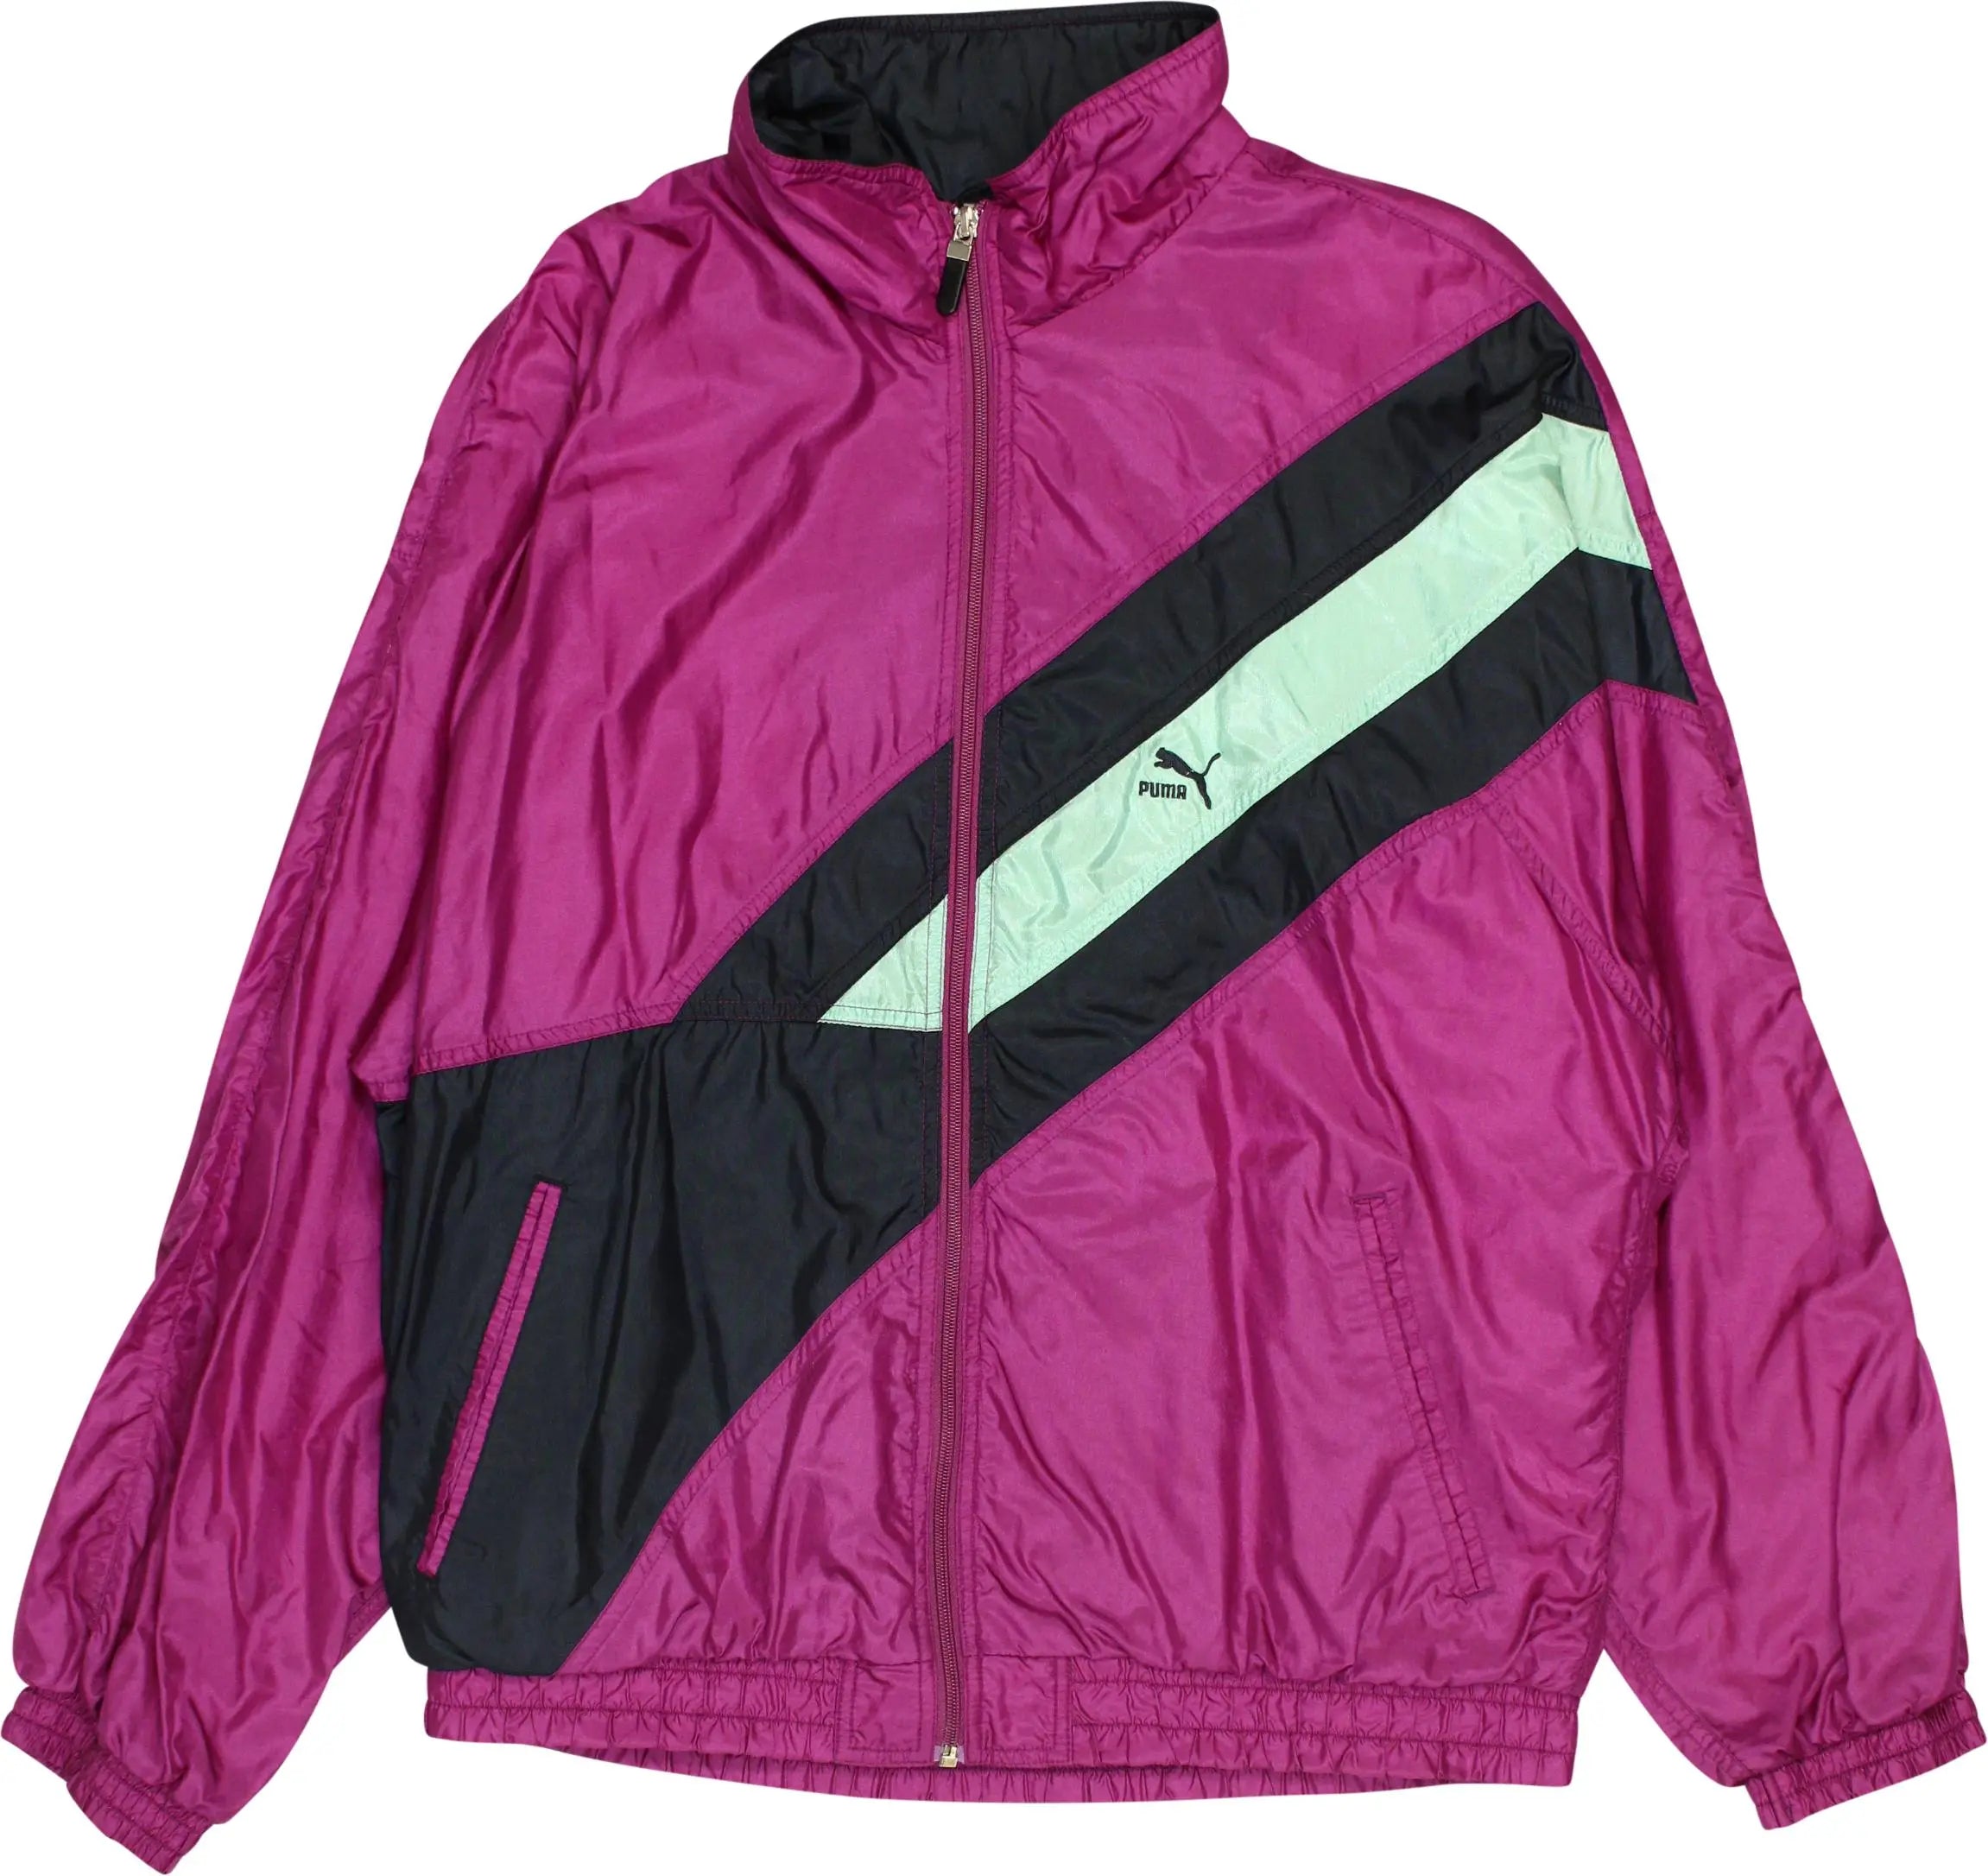 Puma - 90s Windbreaker by Puma- ThriftTale.com - Vintage and second handclothing